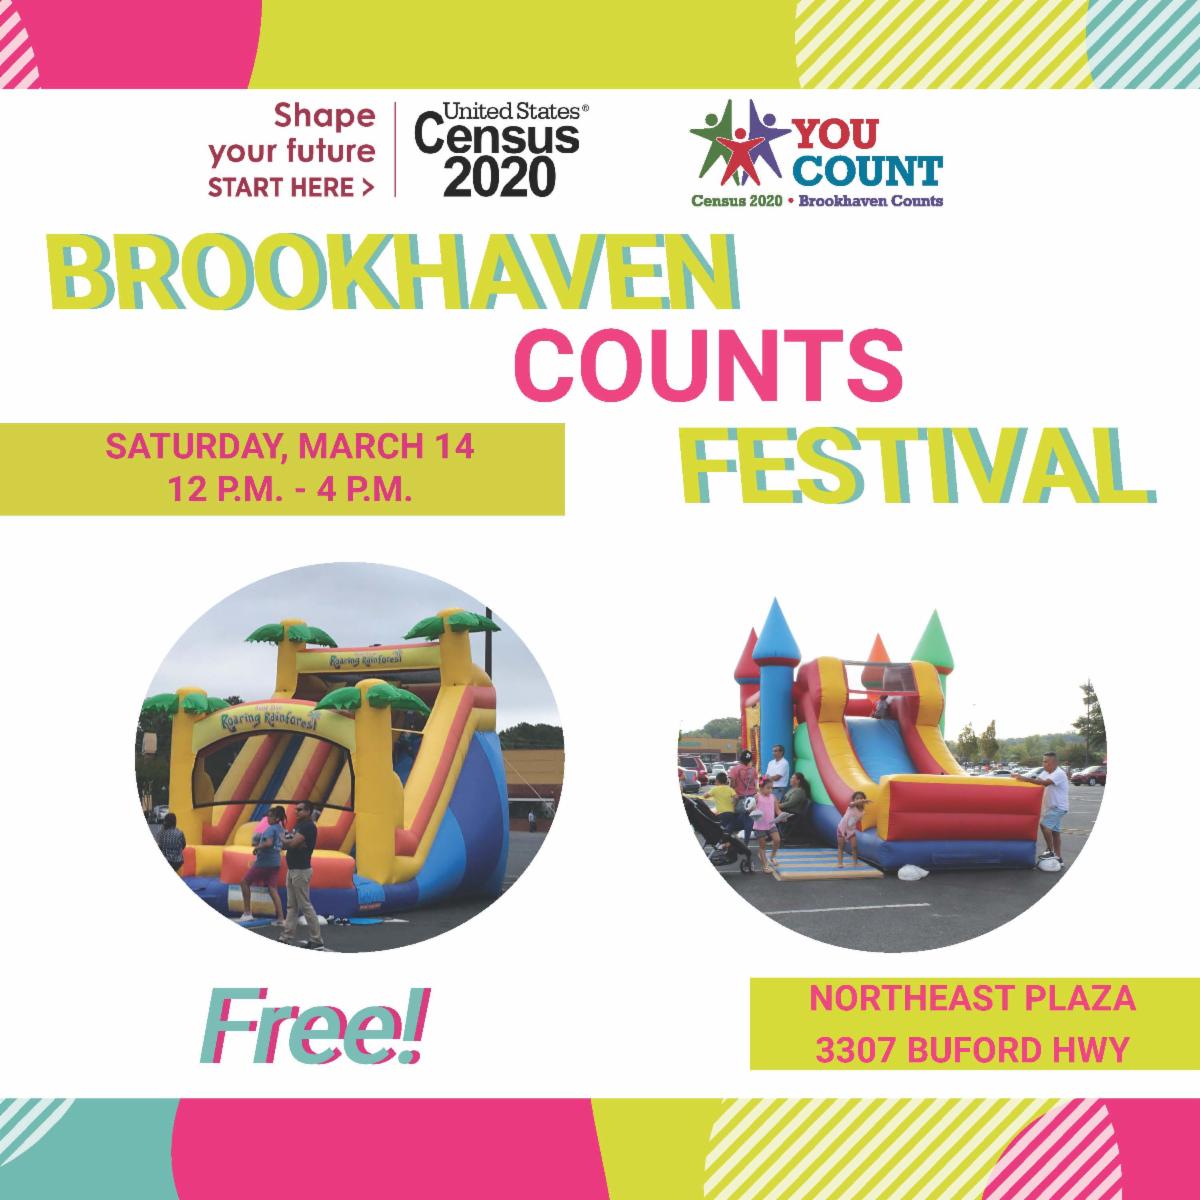 Brookhaven presents the Brookhaven Counts Festival at Northeast Plaza